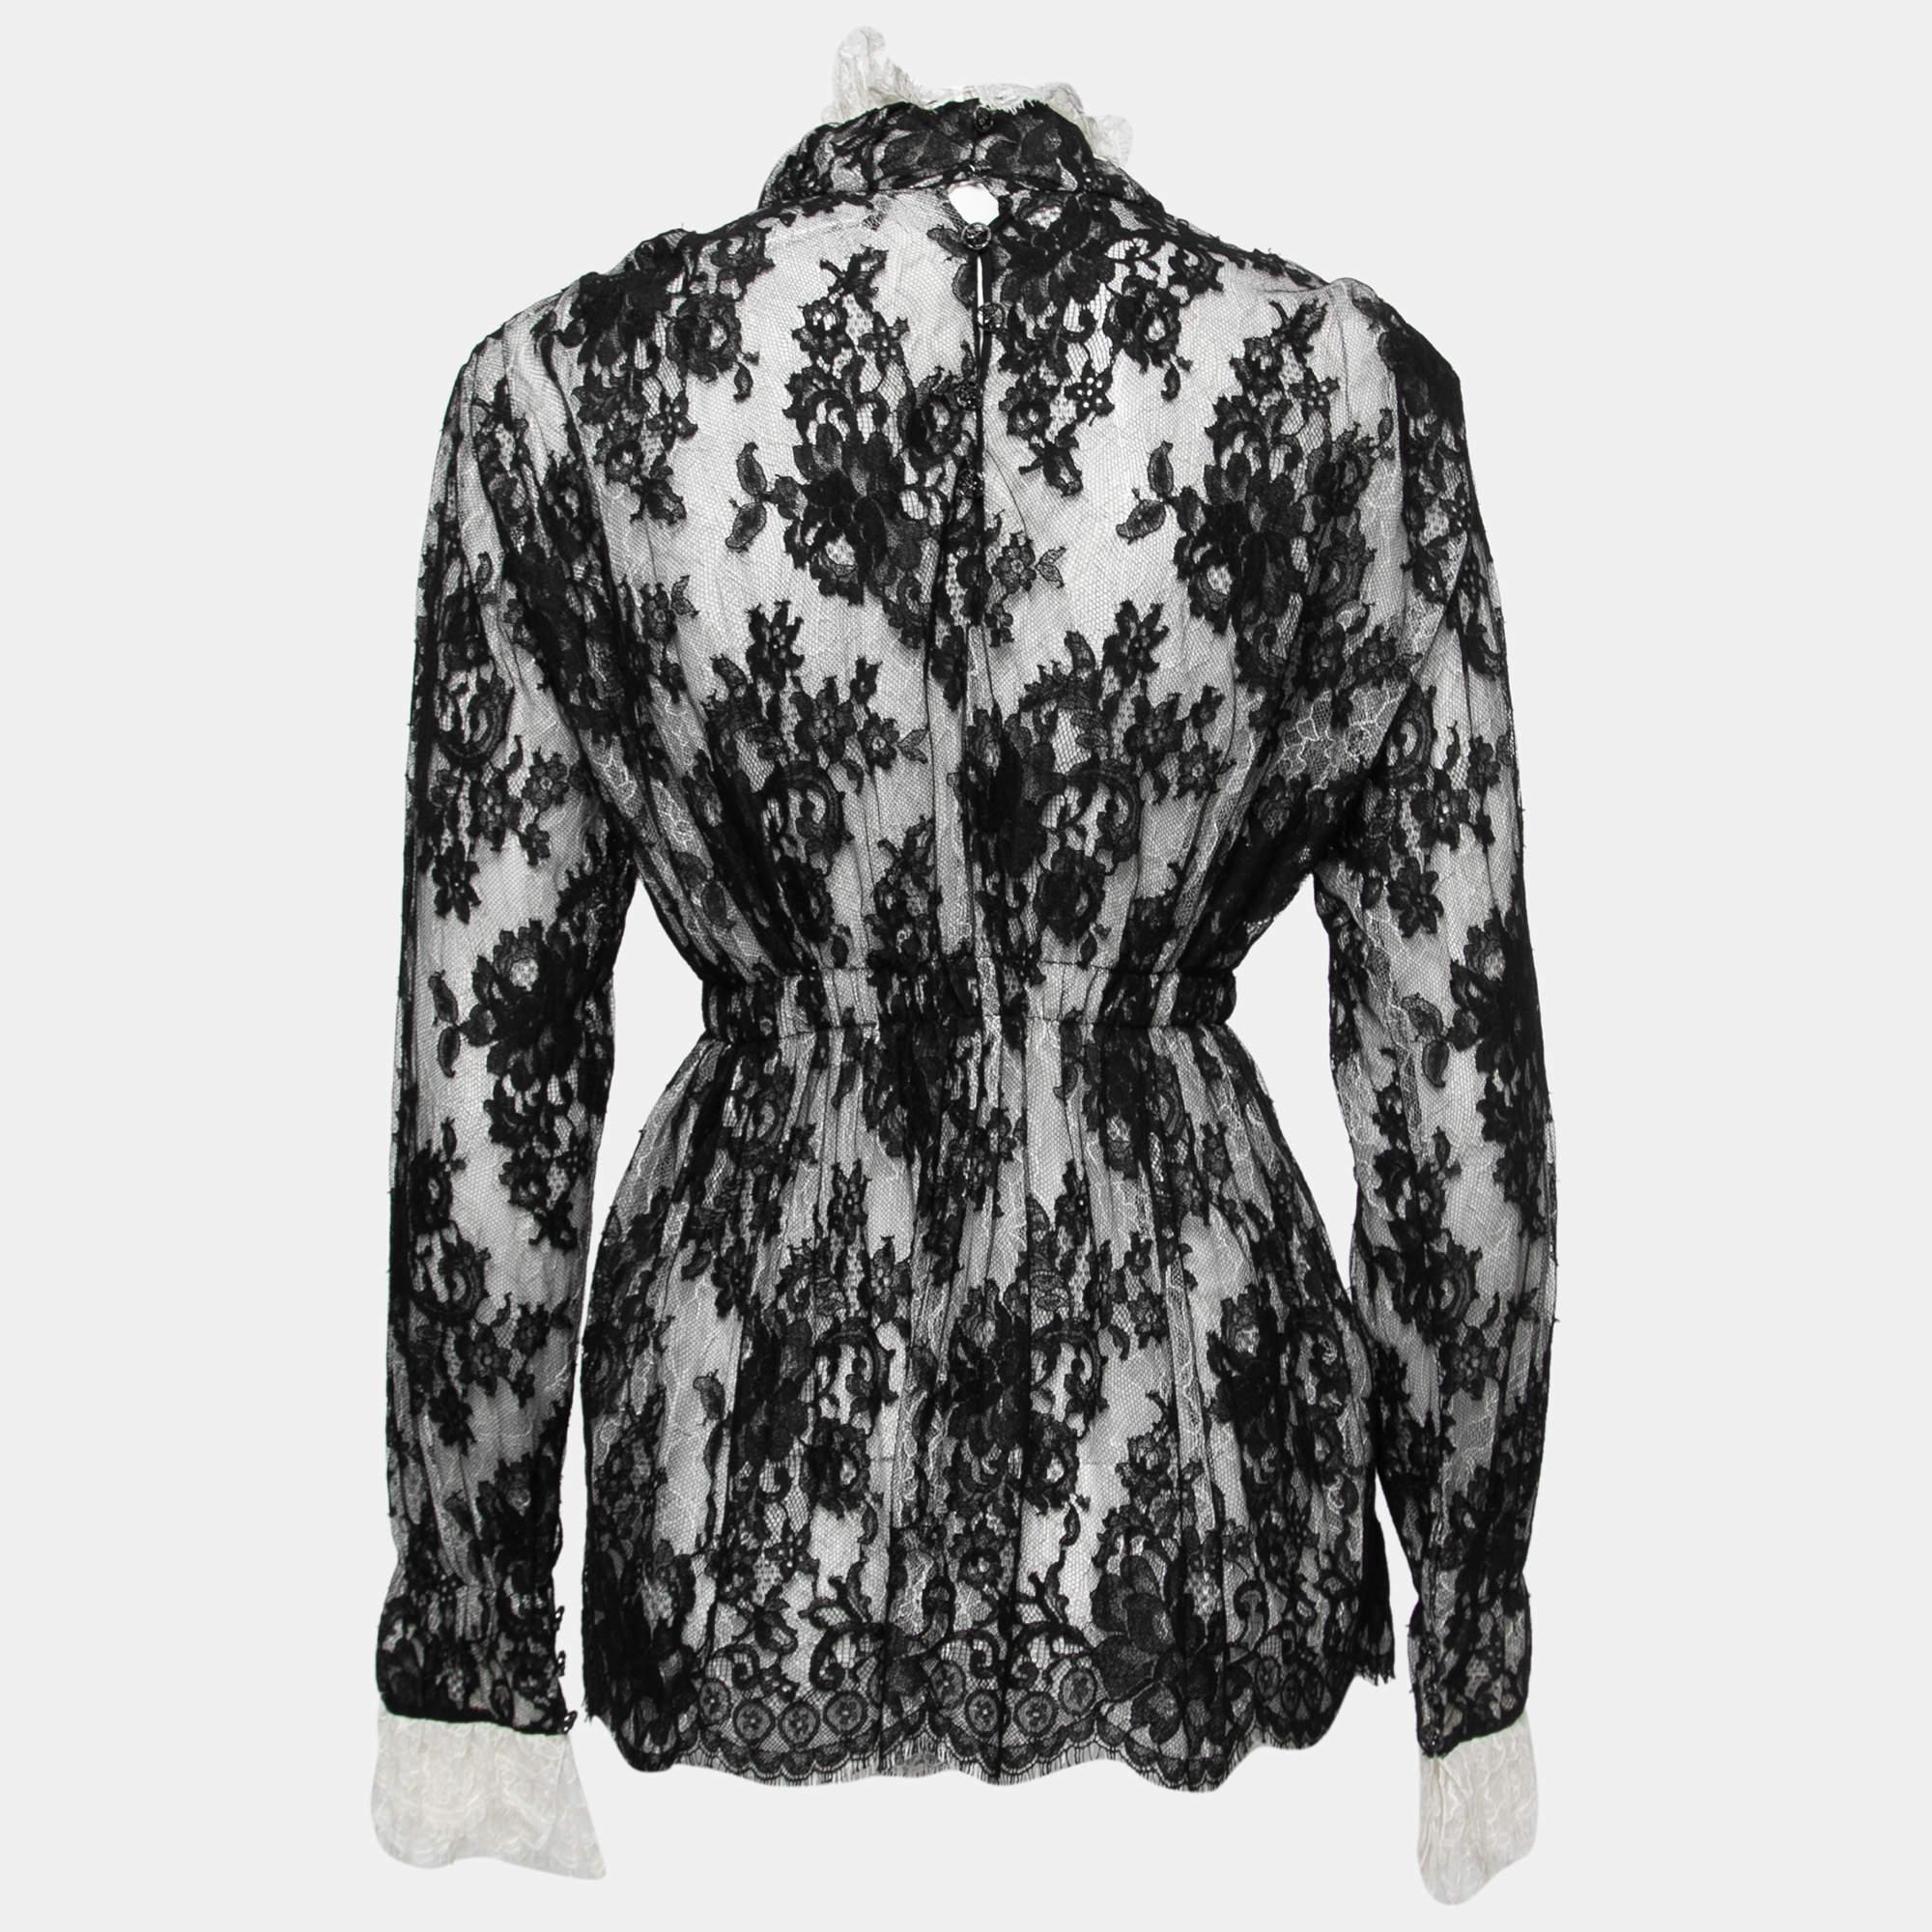 Women's Chanel Black and White Lace Turtle Neck Long Sleeve Salzburg Blouse S